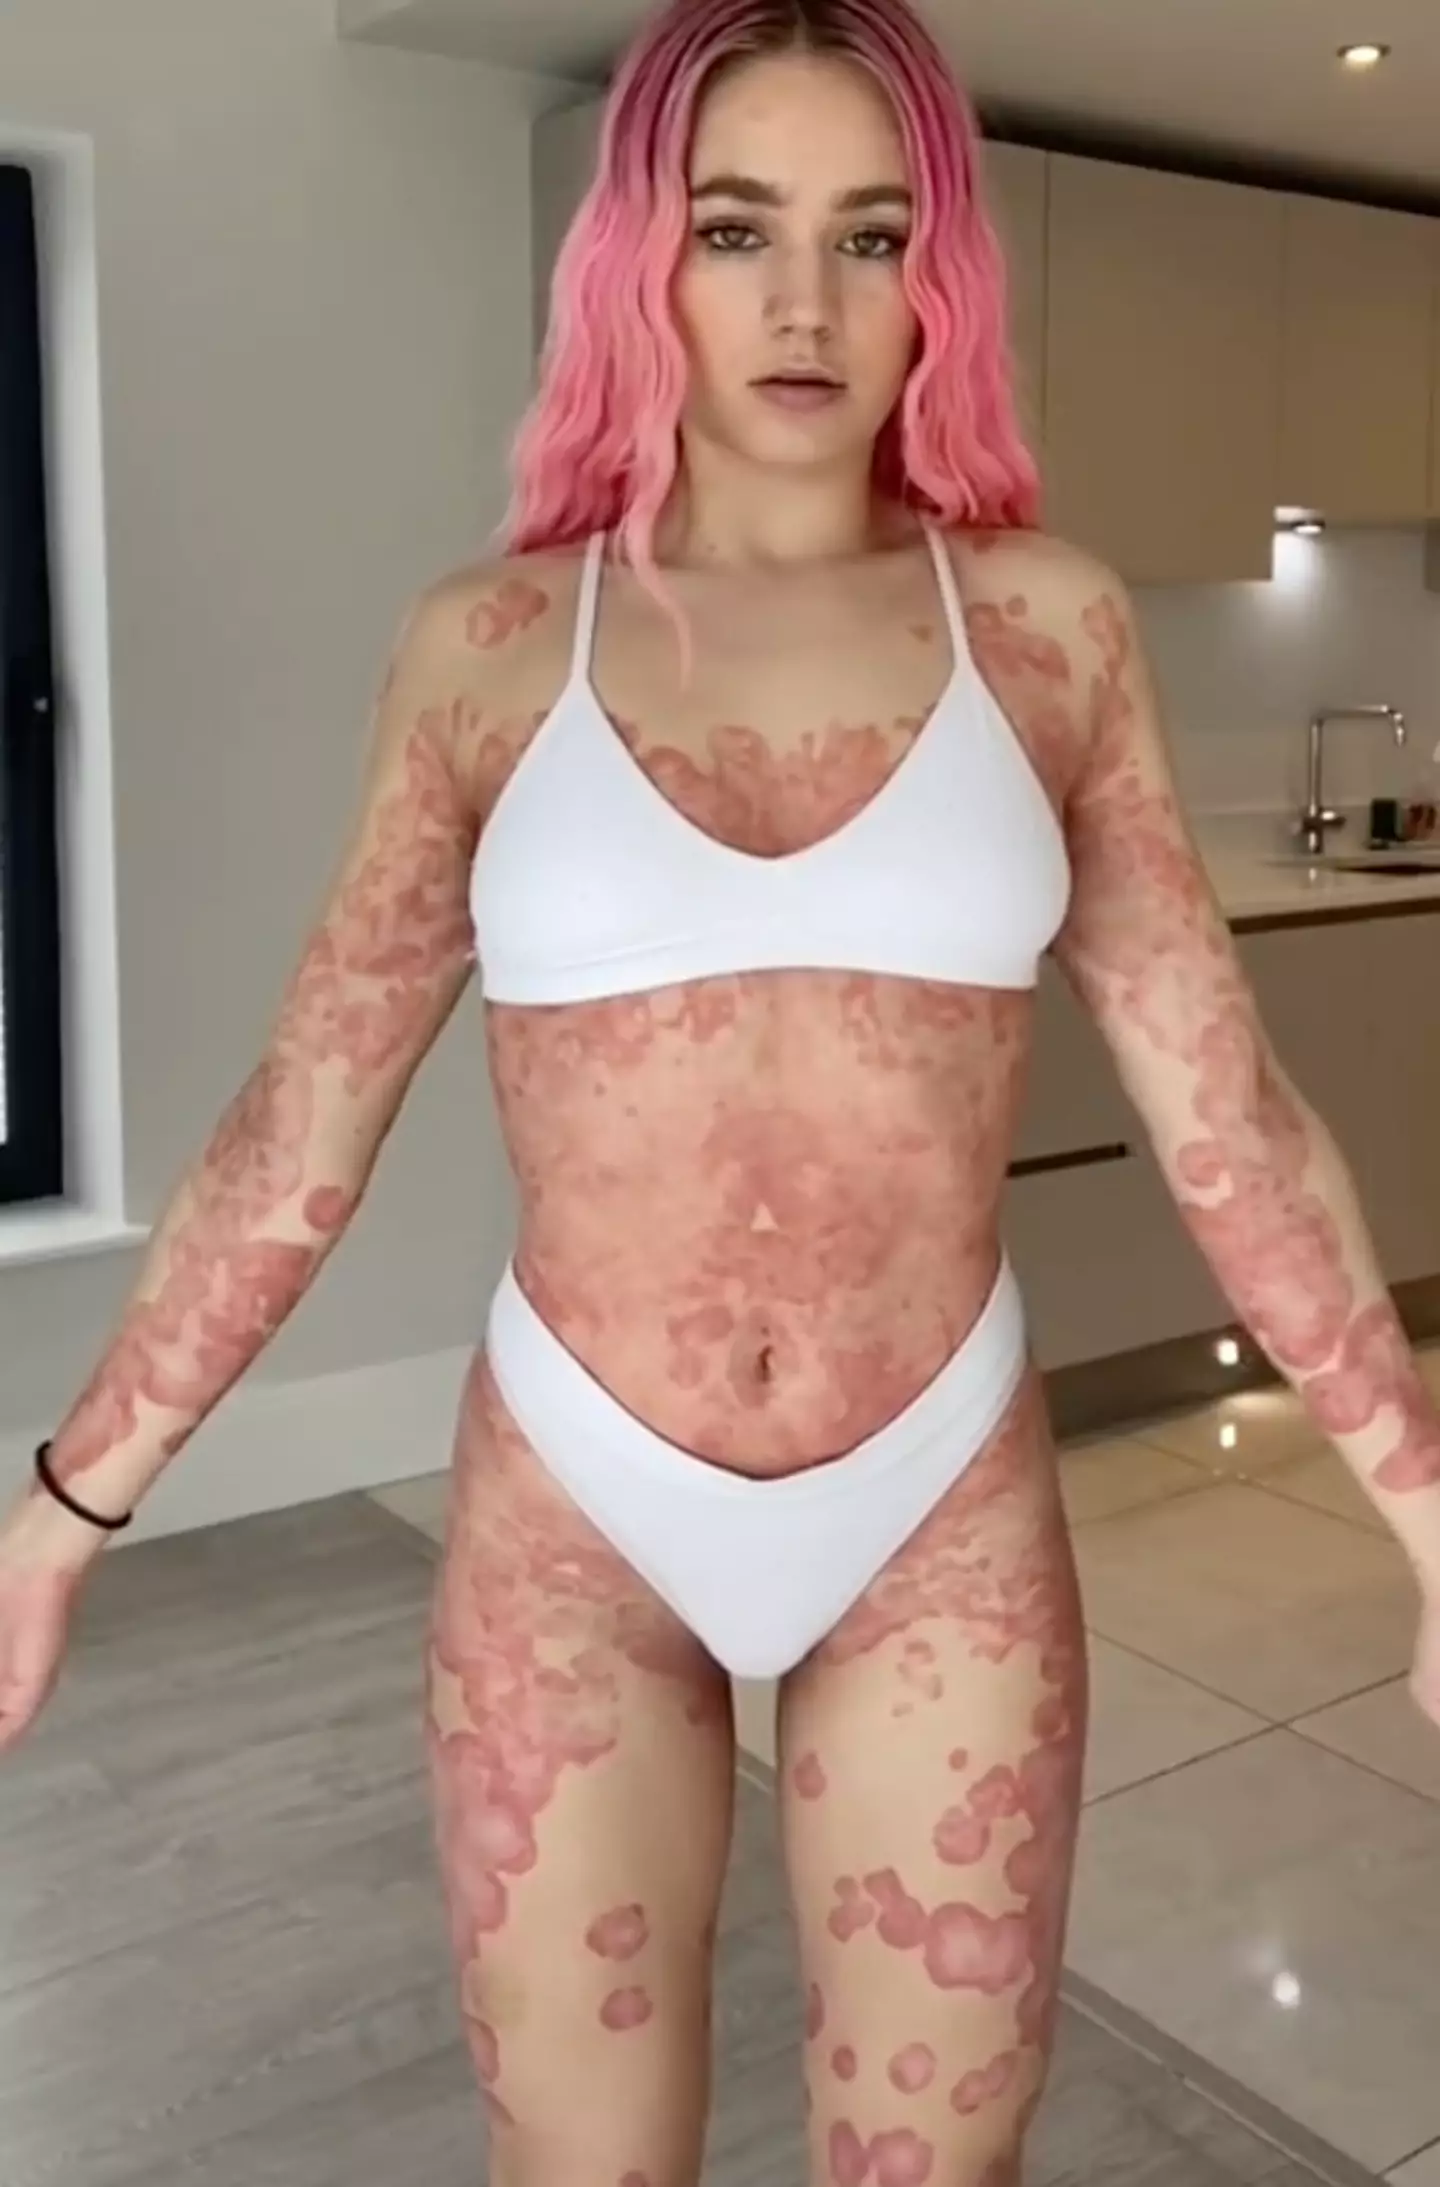 Rosie's psoriasis covered 90 per cent of her body.